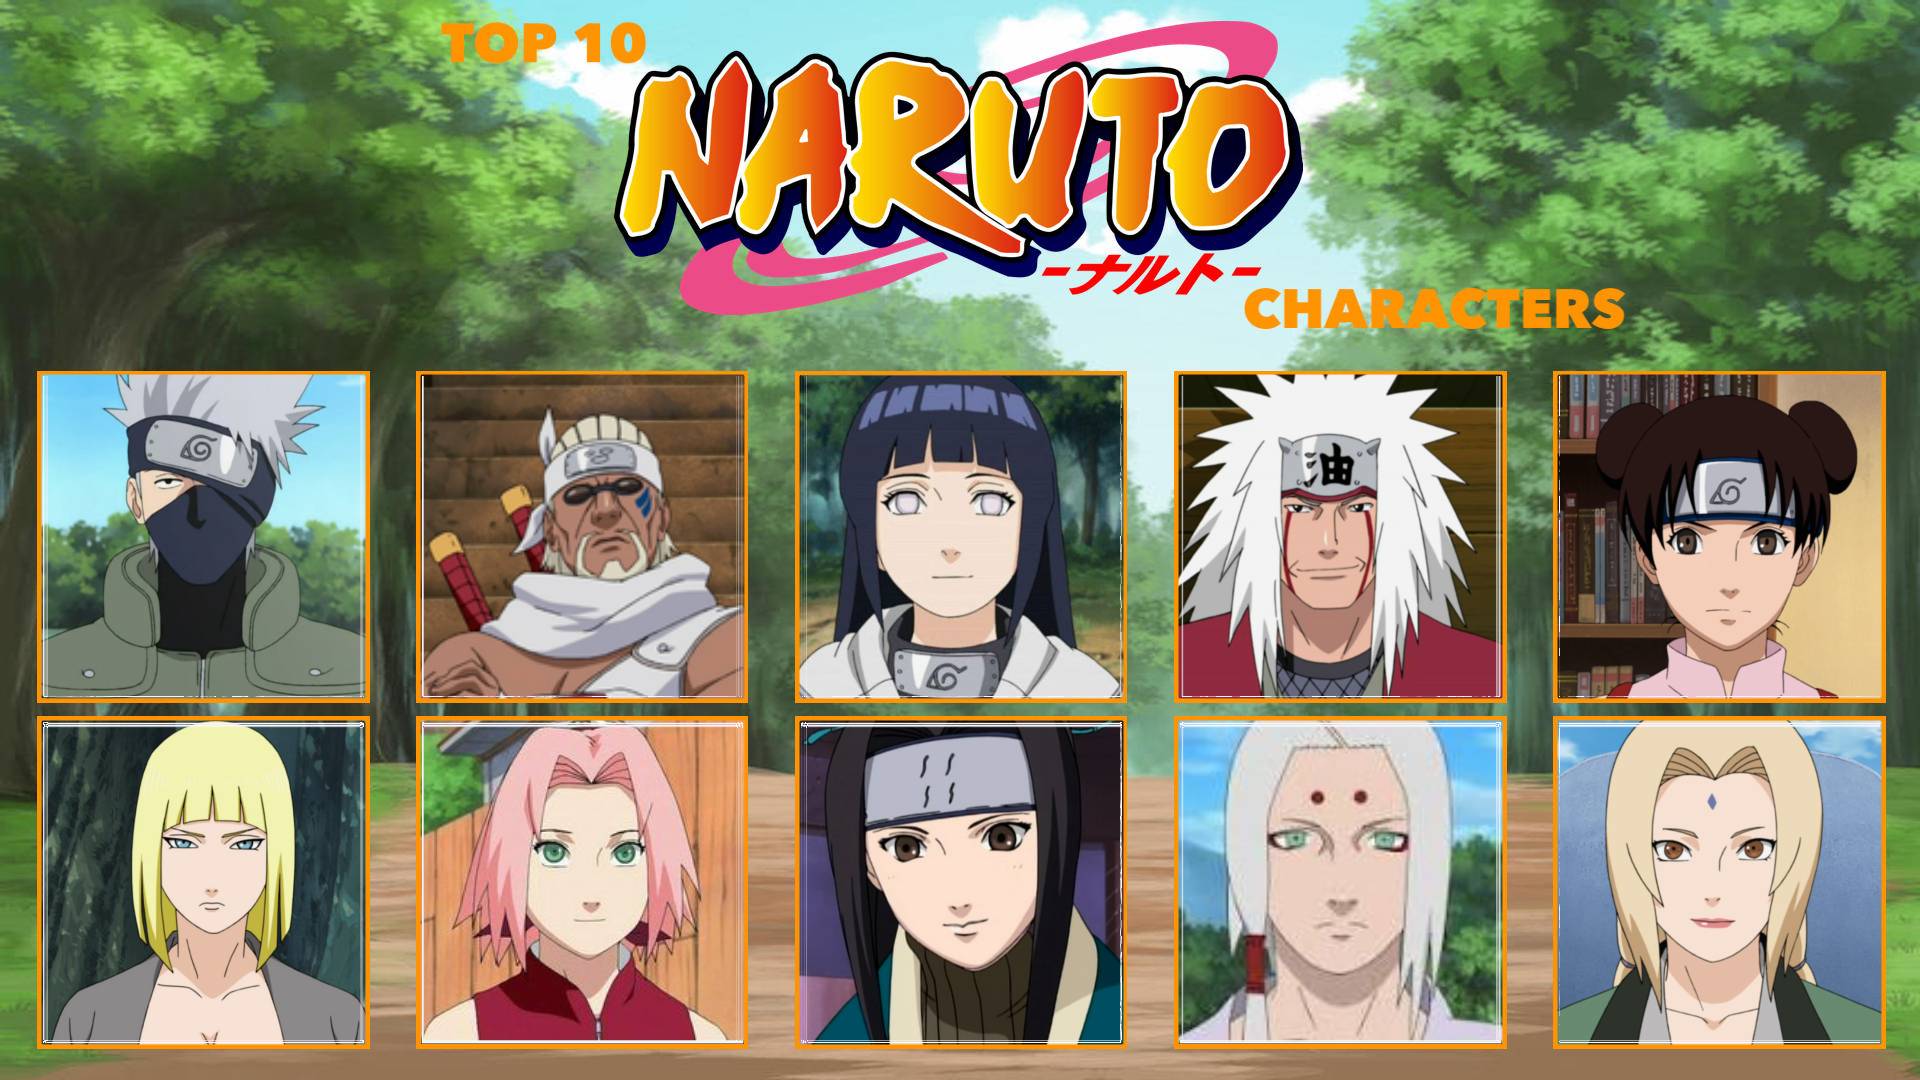 Top 10 naruto characters by Dreamy-cinnamon on DeviantArt